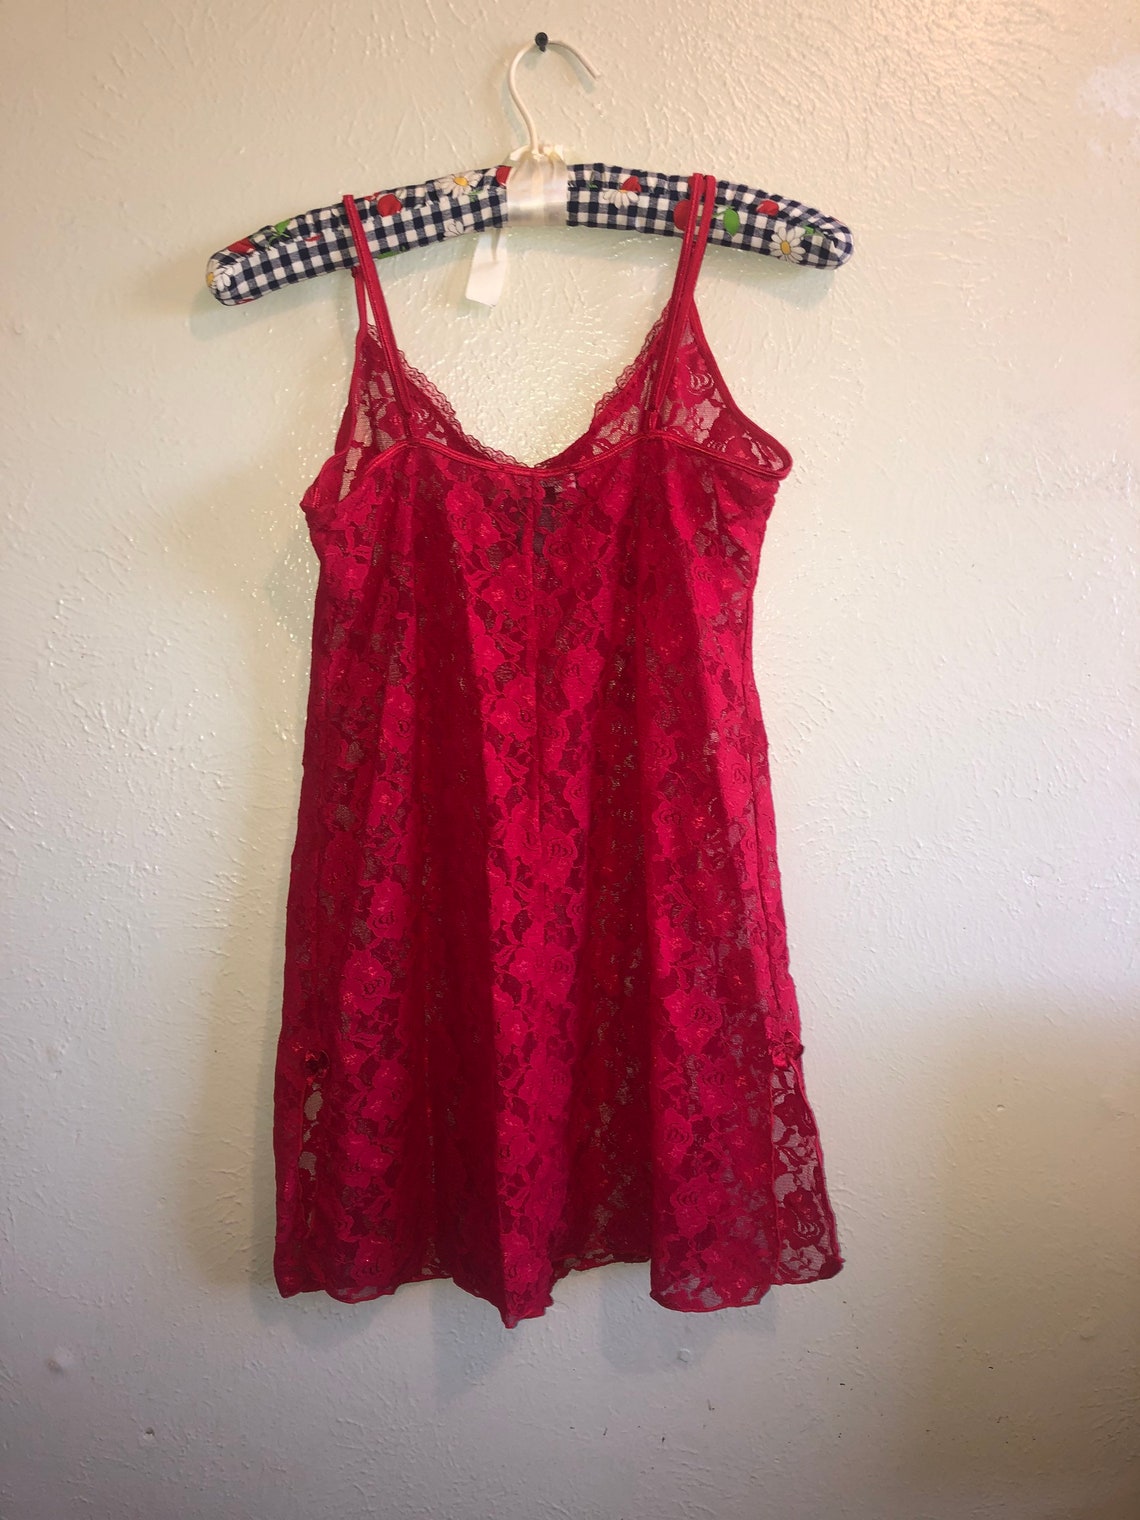 SALE Closing Shop SALE Negligee Nightie Sexy Lace Lingerie Red | Etsy